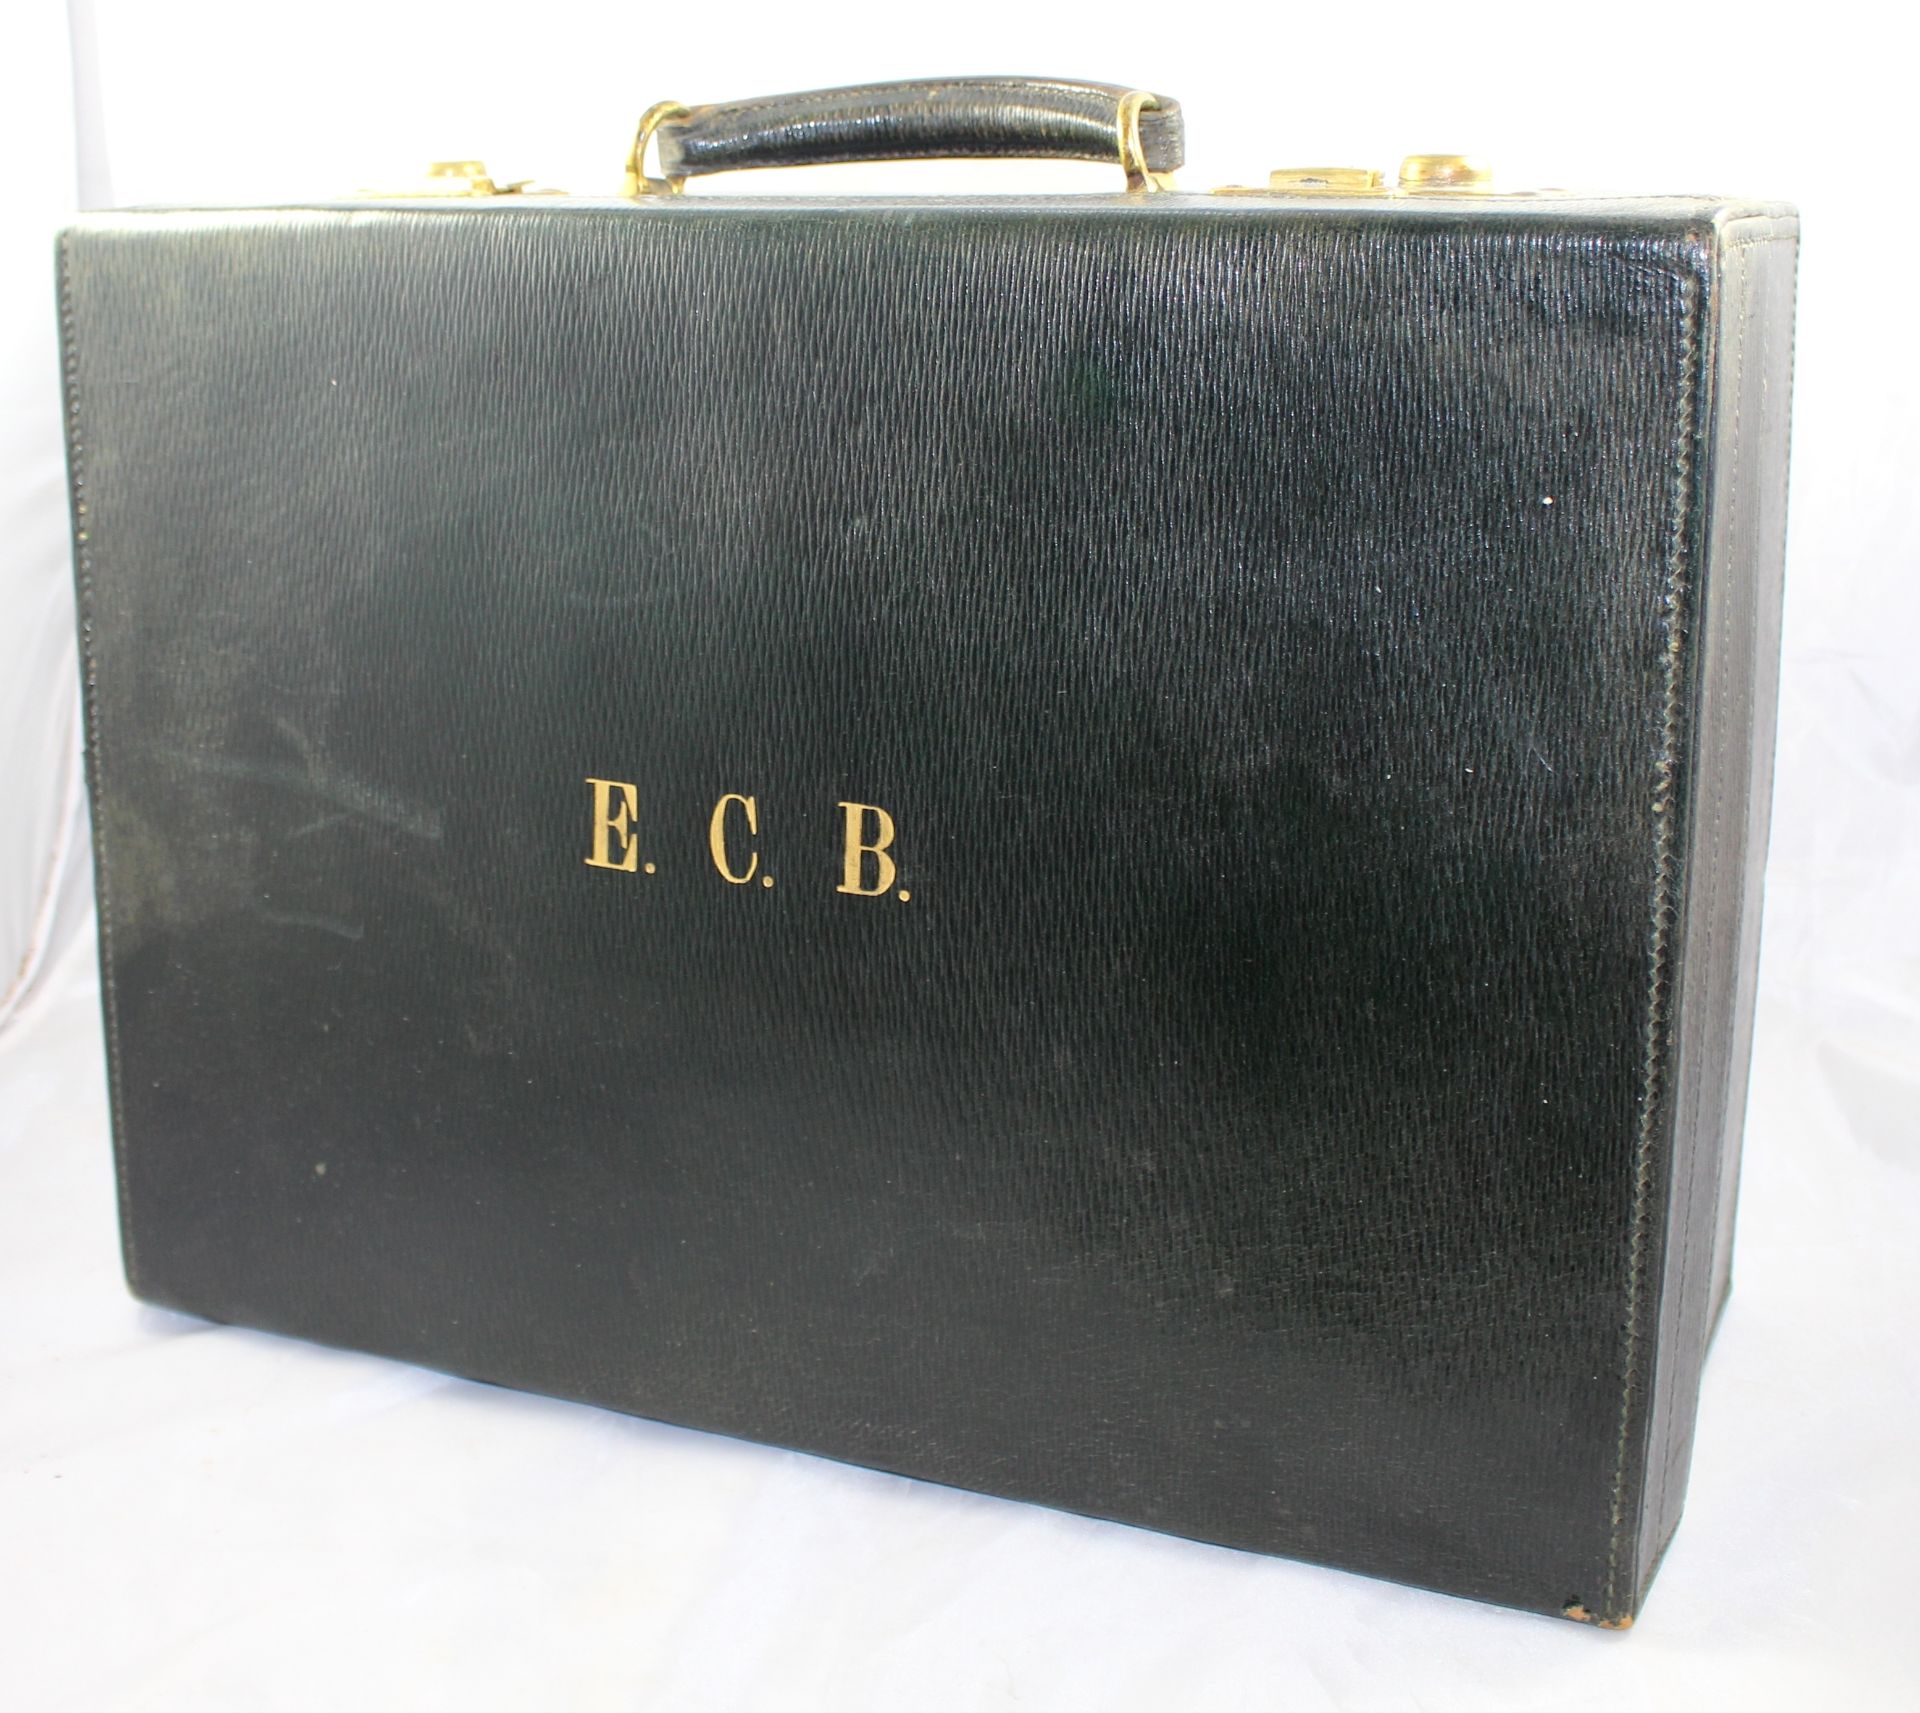 Early 20th c. Cased Silver Travelling Vanity Case by Walker & Hall - Image 14 of 16